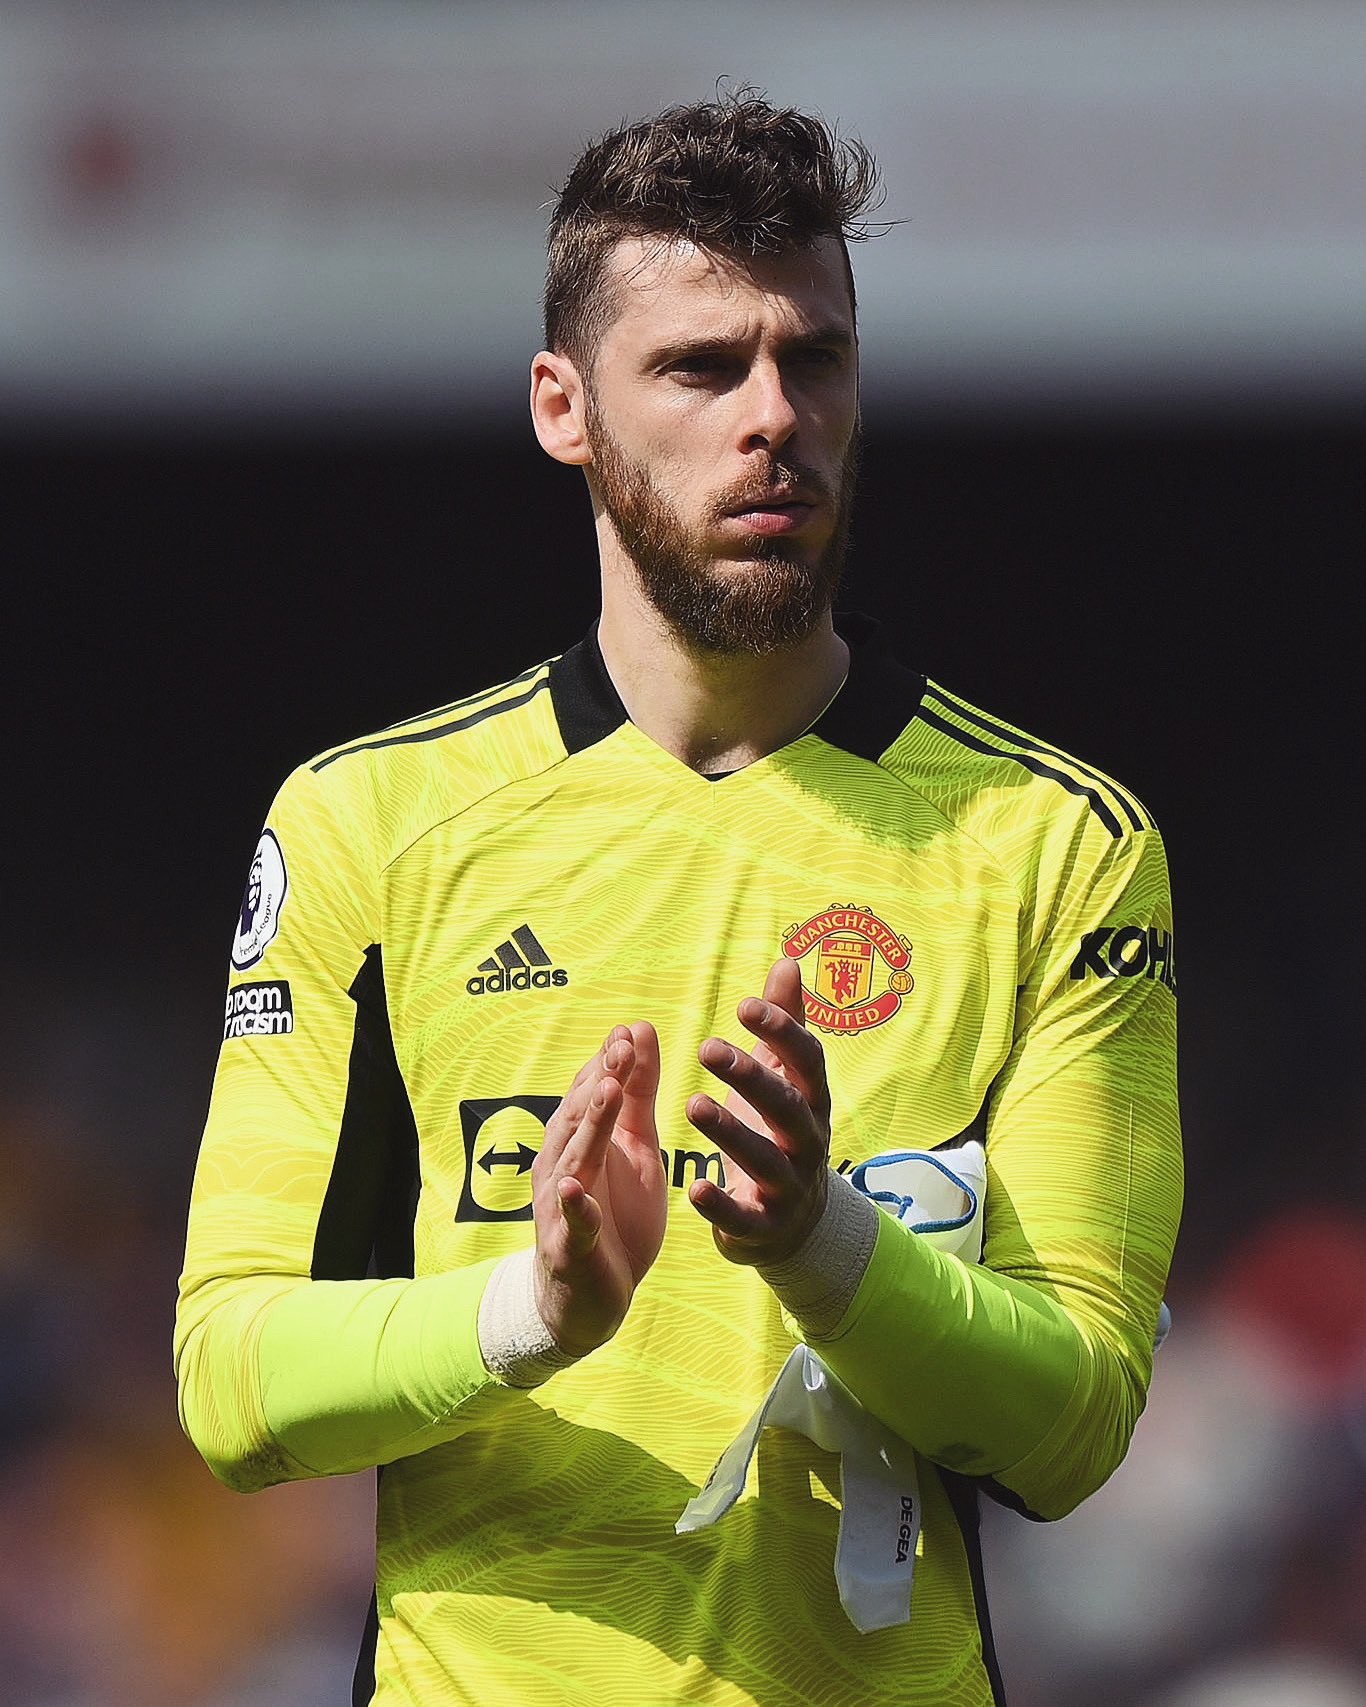 David de Gea on X: "I'm always honest, today we could have got more from this game but in this season we are where we deserve to be. https://t.co/3boAJhkelu" / X